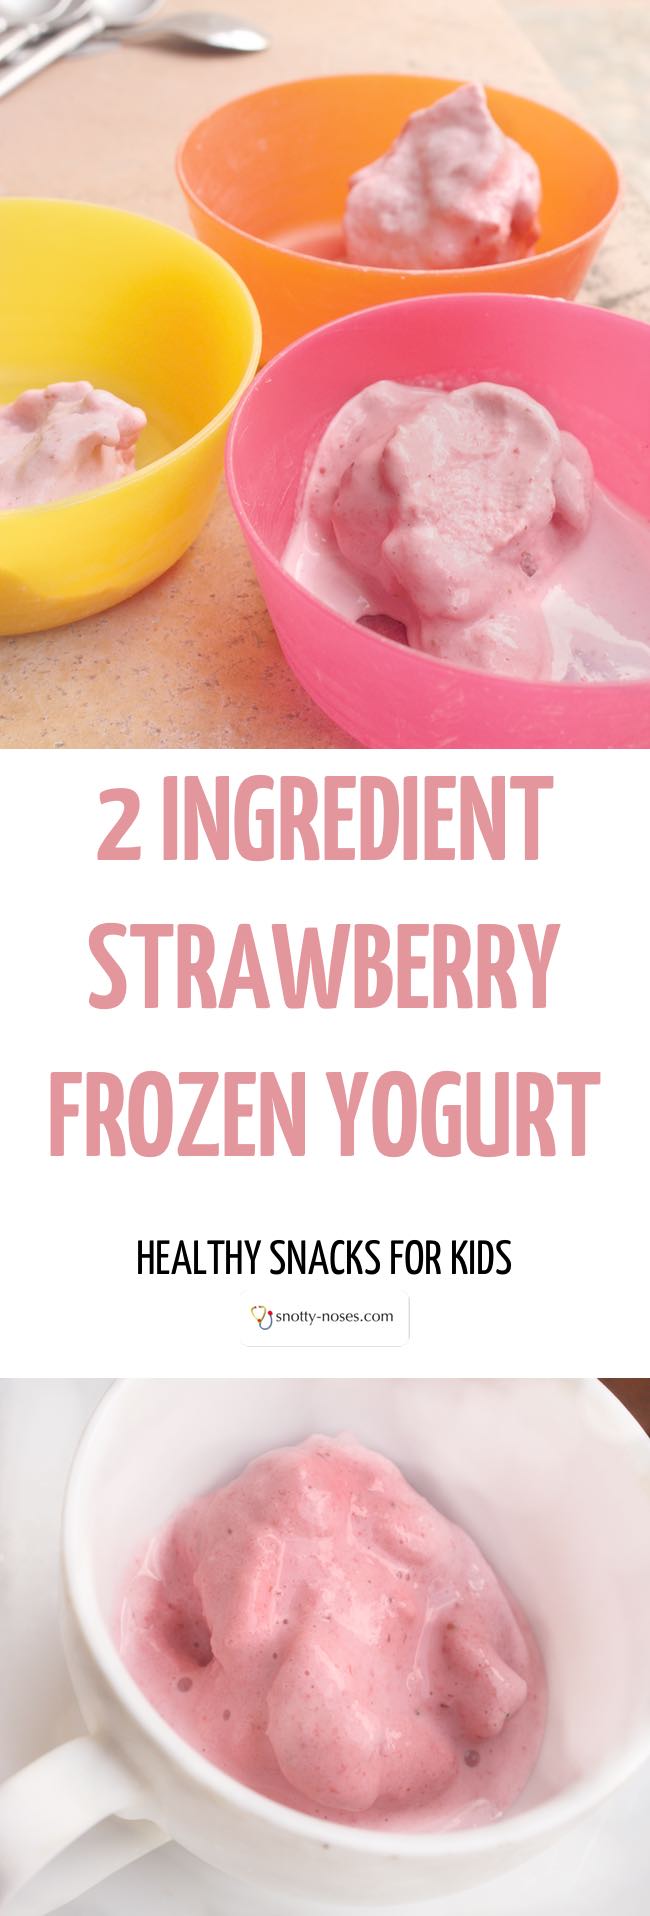 Who said that strawberry frozen yogurt was unhealthy? This is a really easy and really healthy recipe for frozen yogurt that your kids and friends will love. Just 2 ingredients, no added sugar and ready in minutes. I'm happy for my kids to eat this every day!.